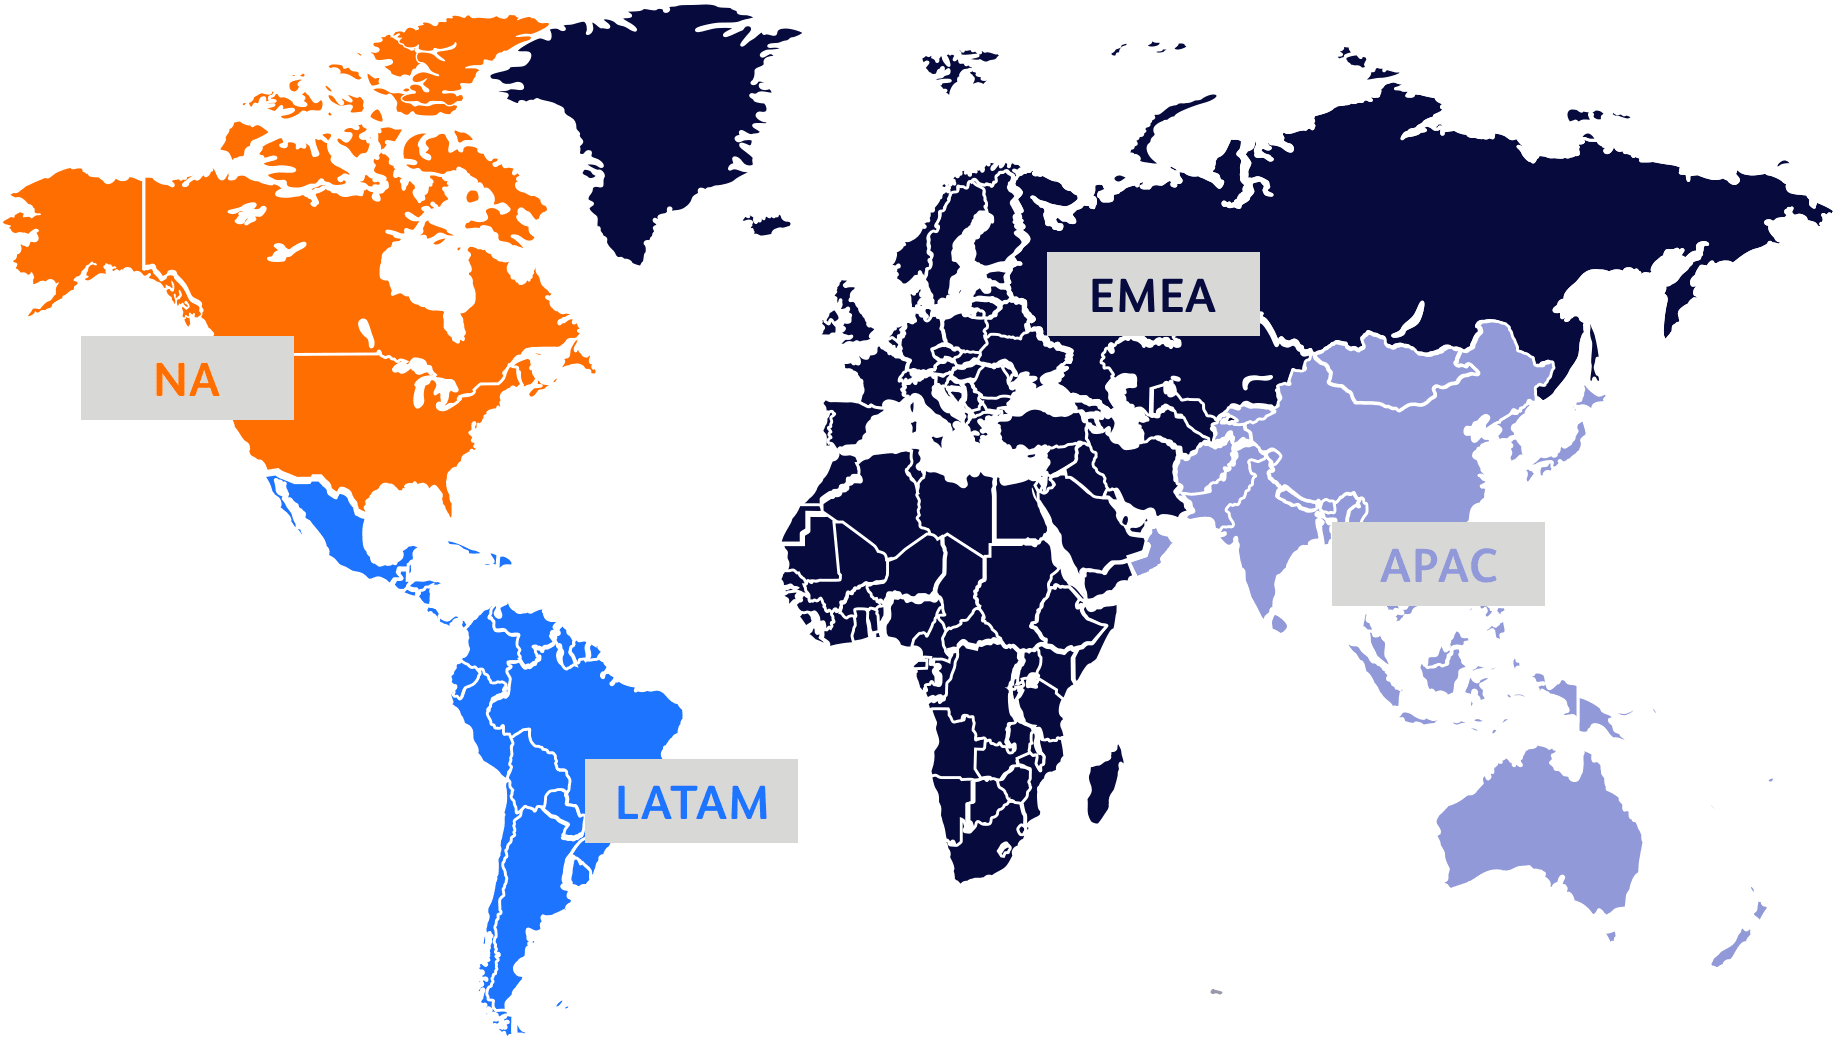 World map of each region highlighted and labeled